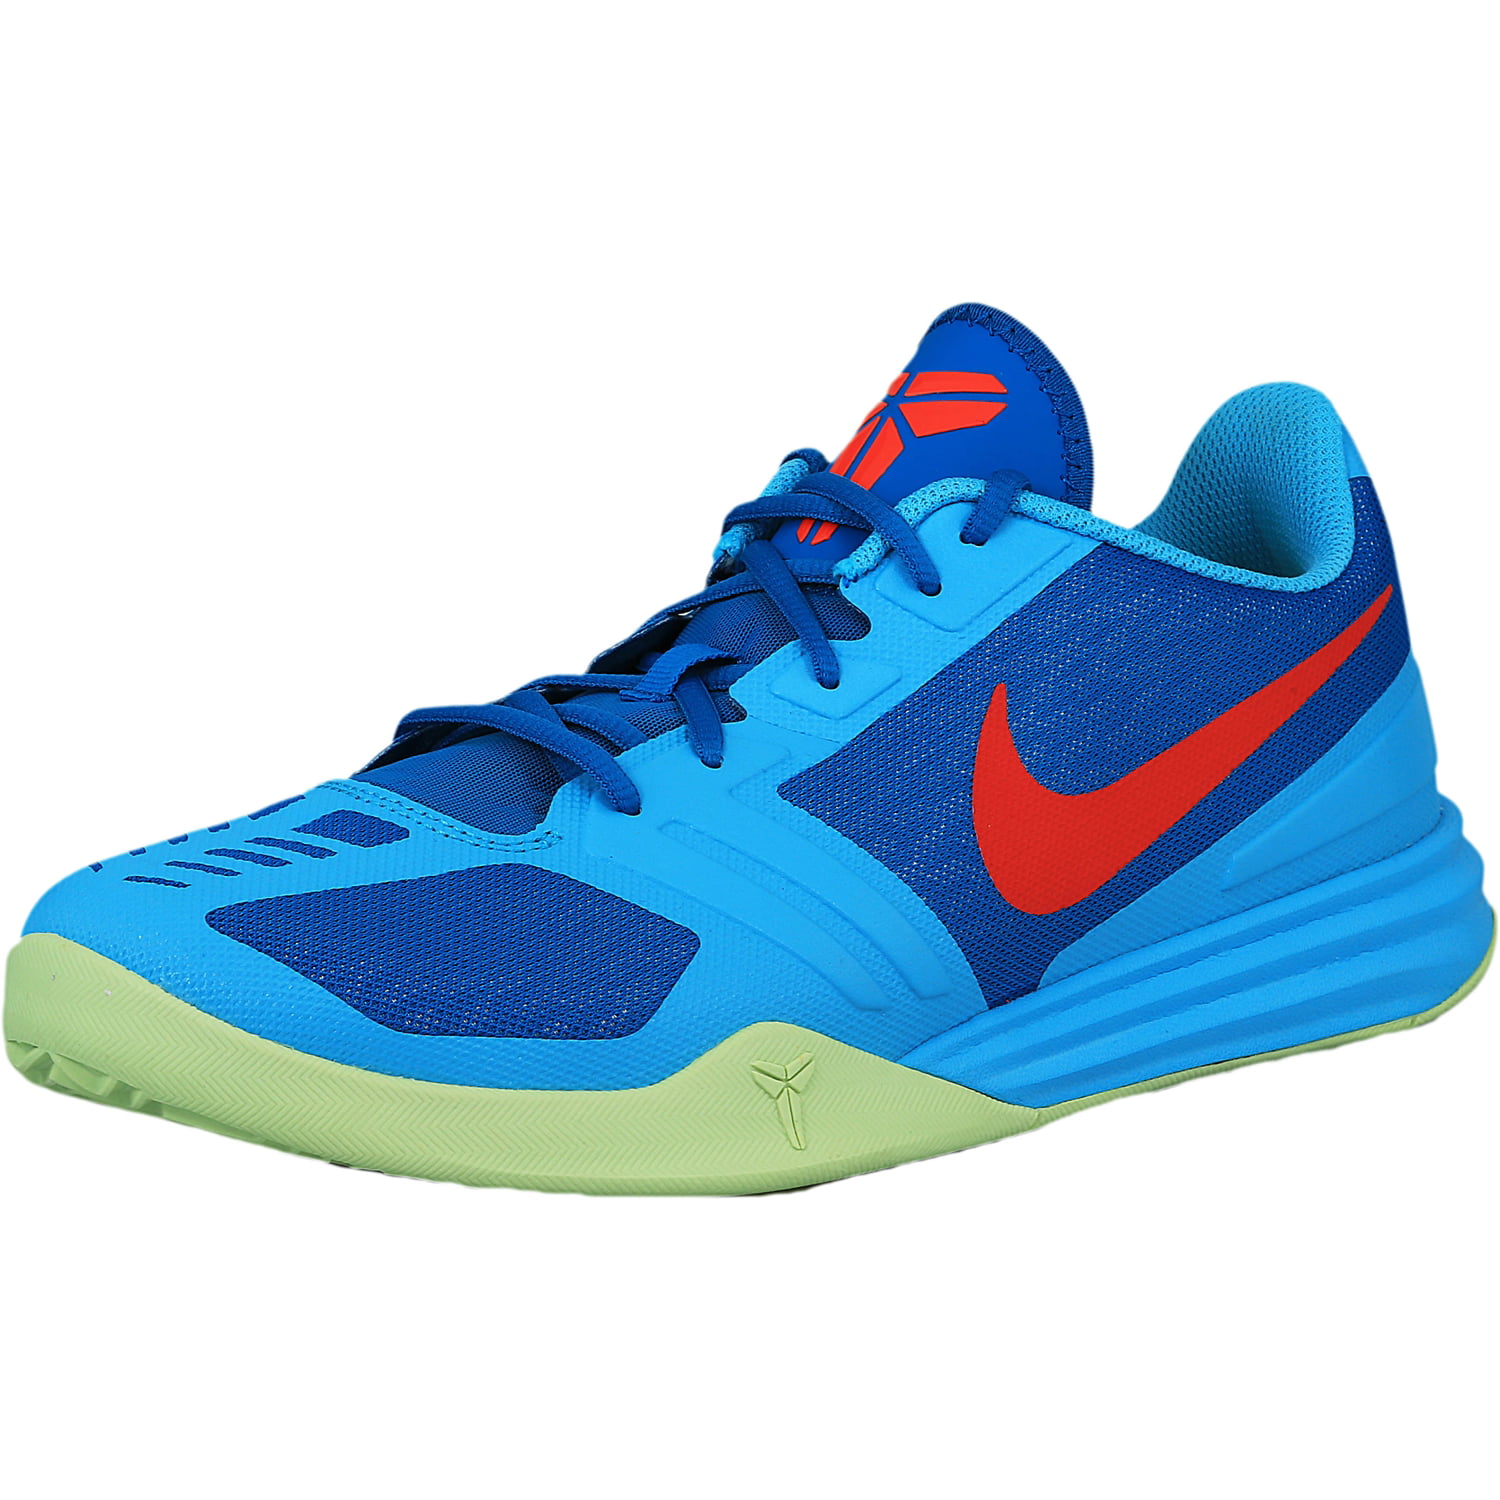 Nike Men's KB Mentality Clearwater / Bright Crimson-Light Blue Lacquer ...